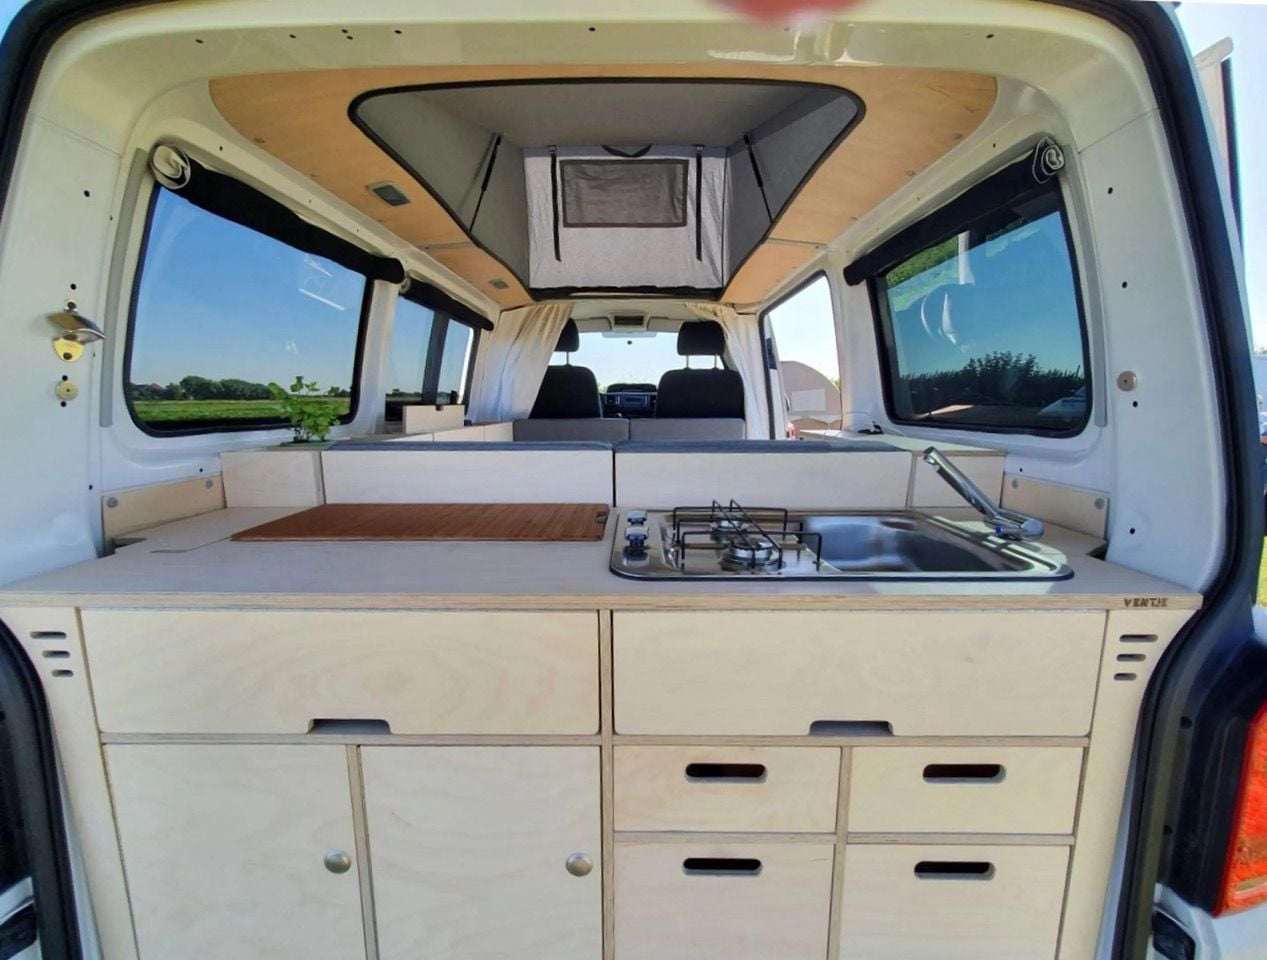 The Ventje's kitchen space is fully stocked, and can be found near the back of the vehicle.